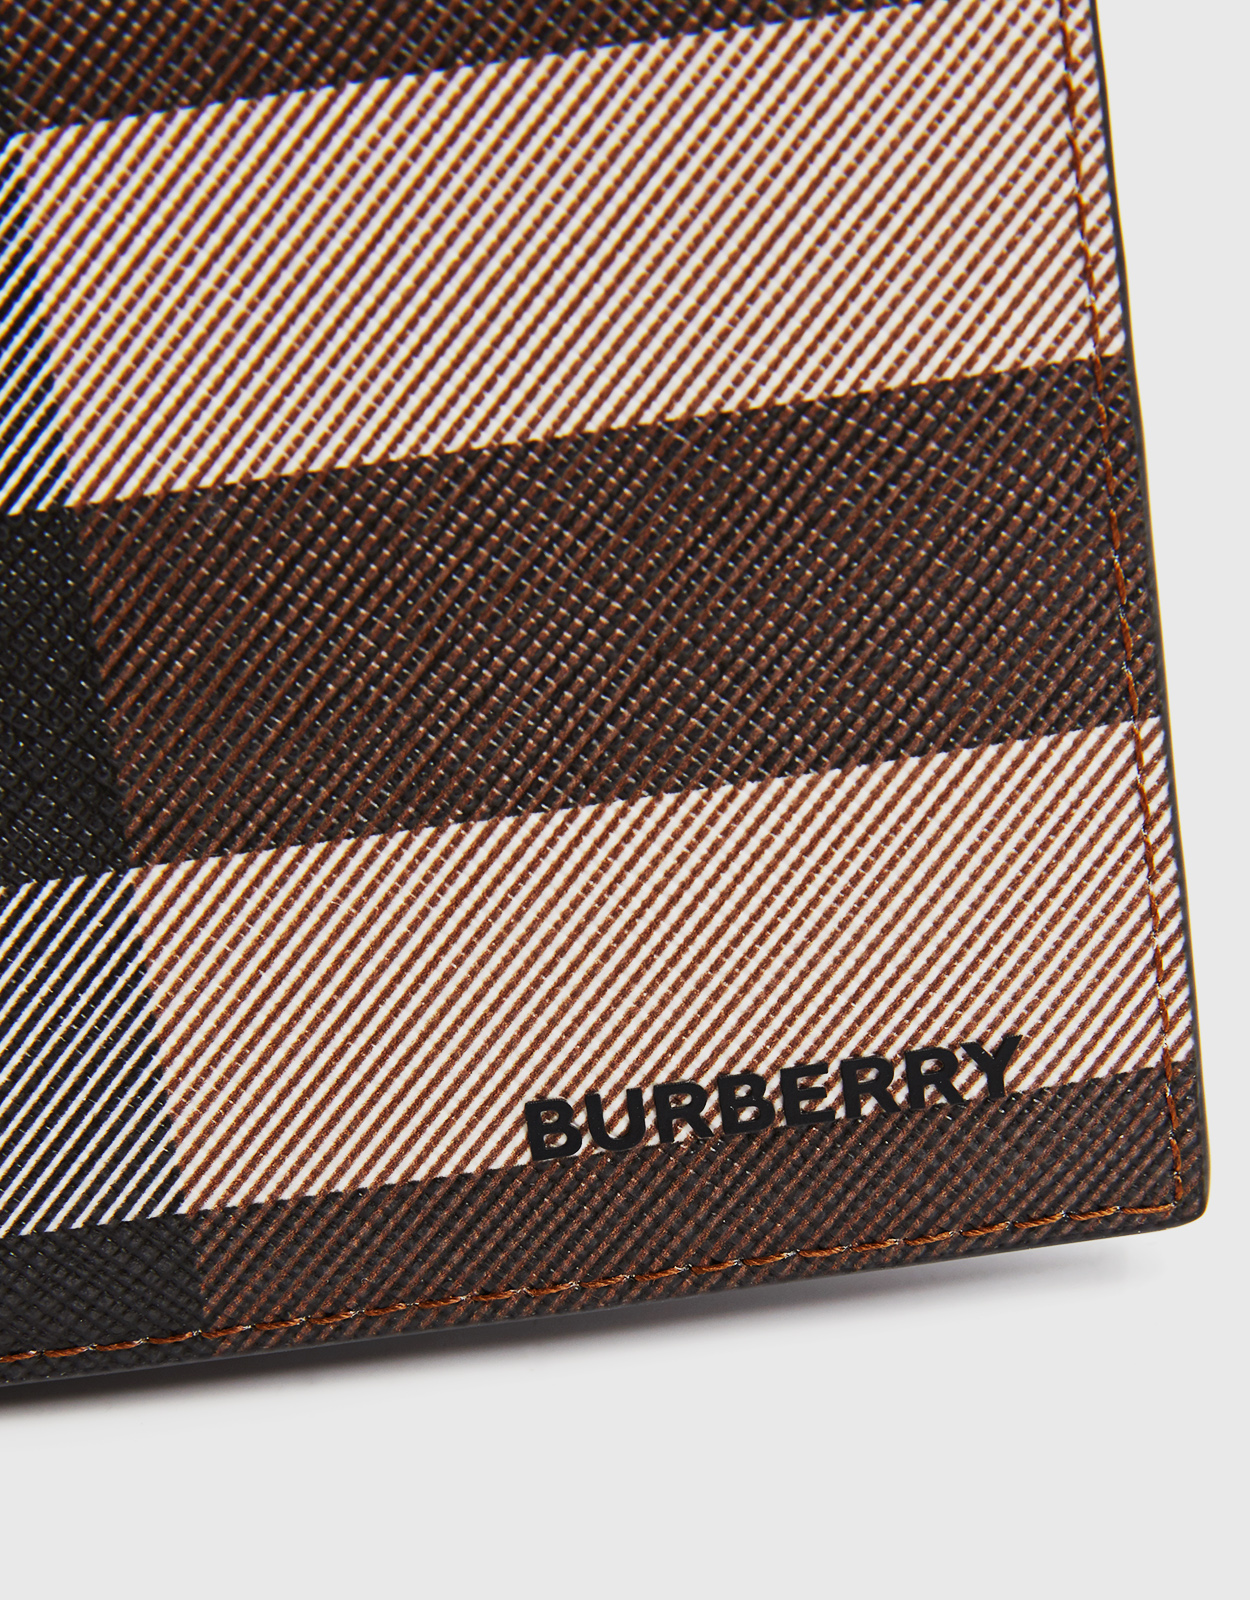 BURBERRY two-fold wallet logo beige canvas ?~ leather Authentic L3326